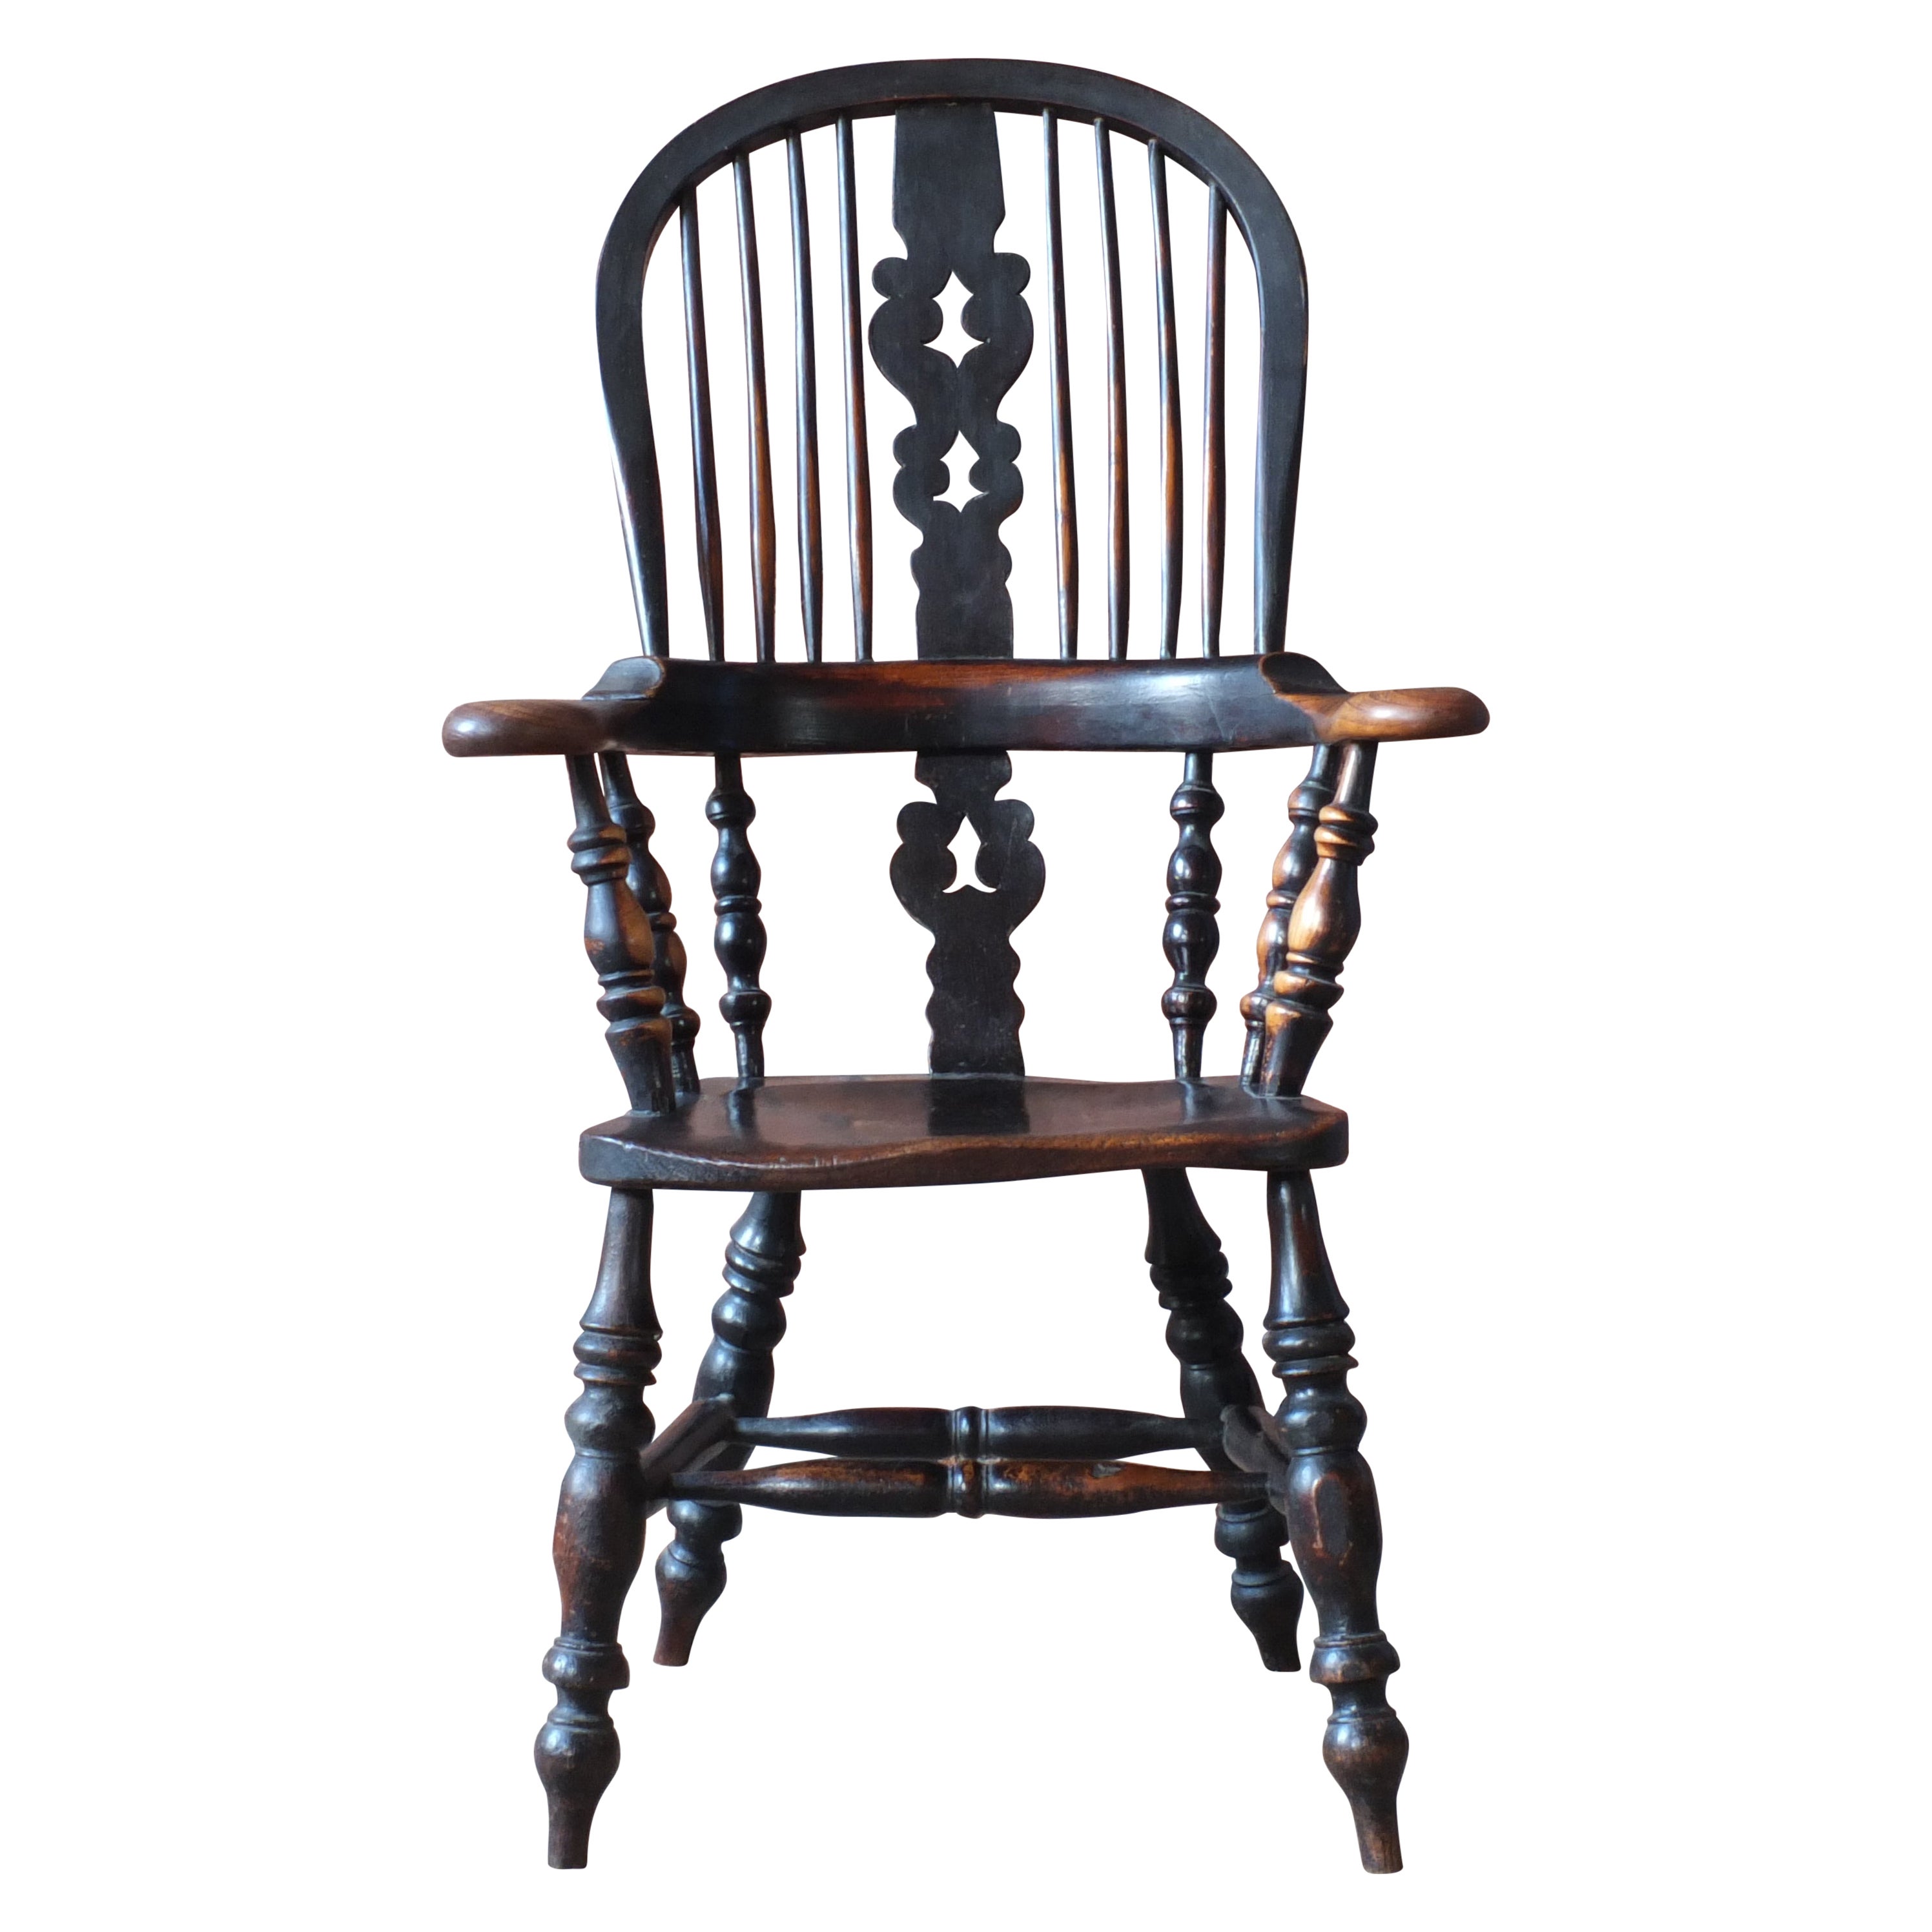 19th century Yorkshire broad arm Windsor chair